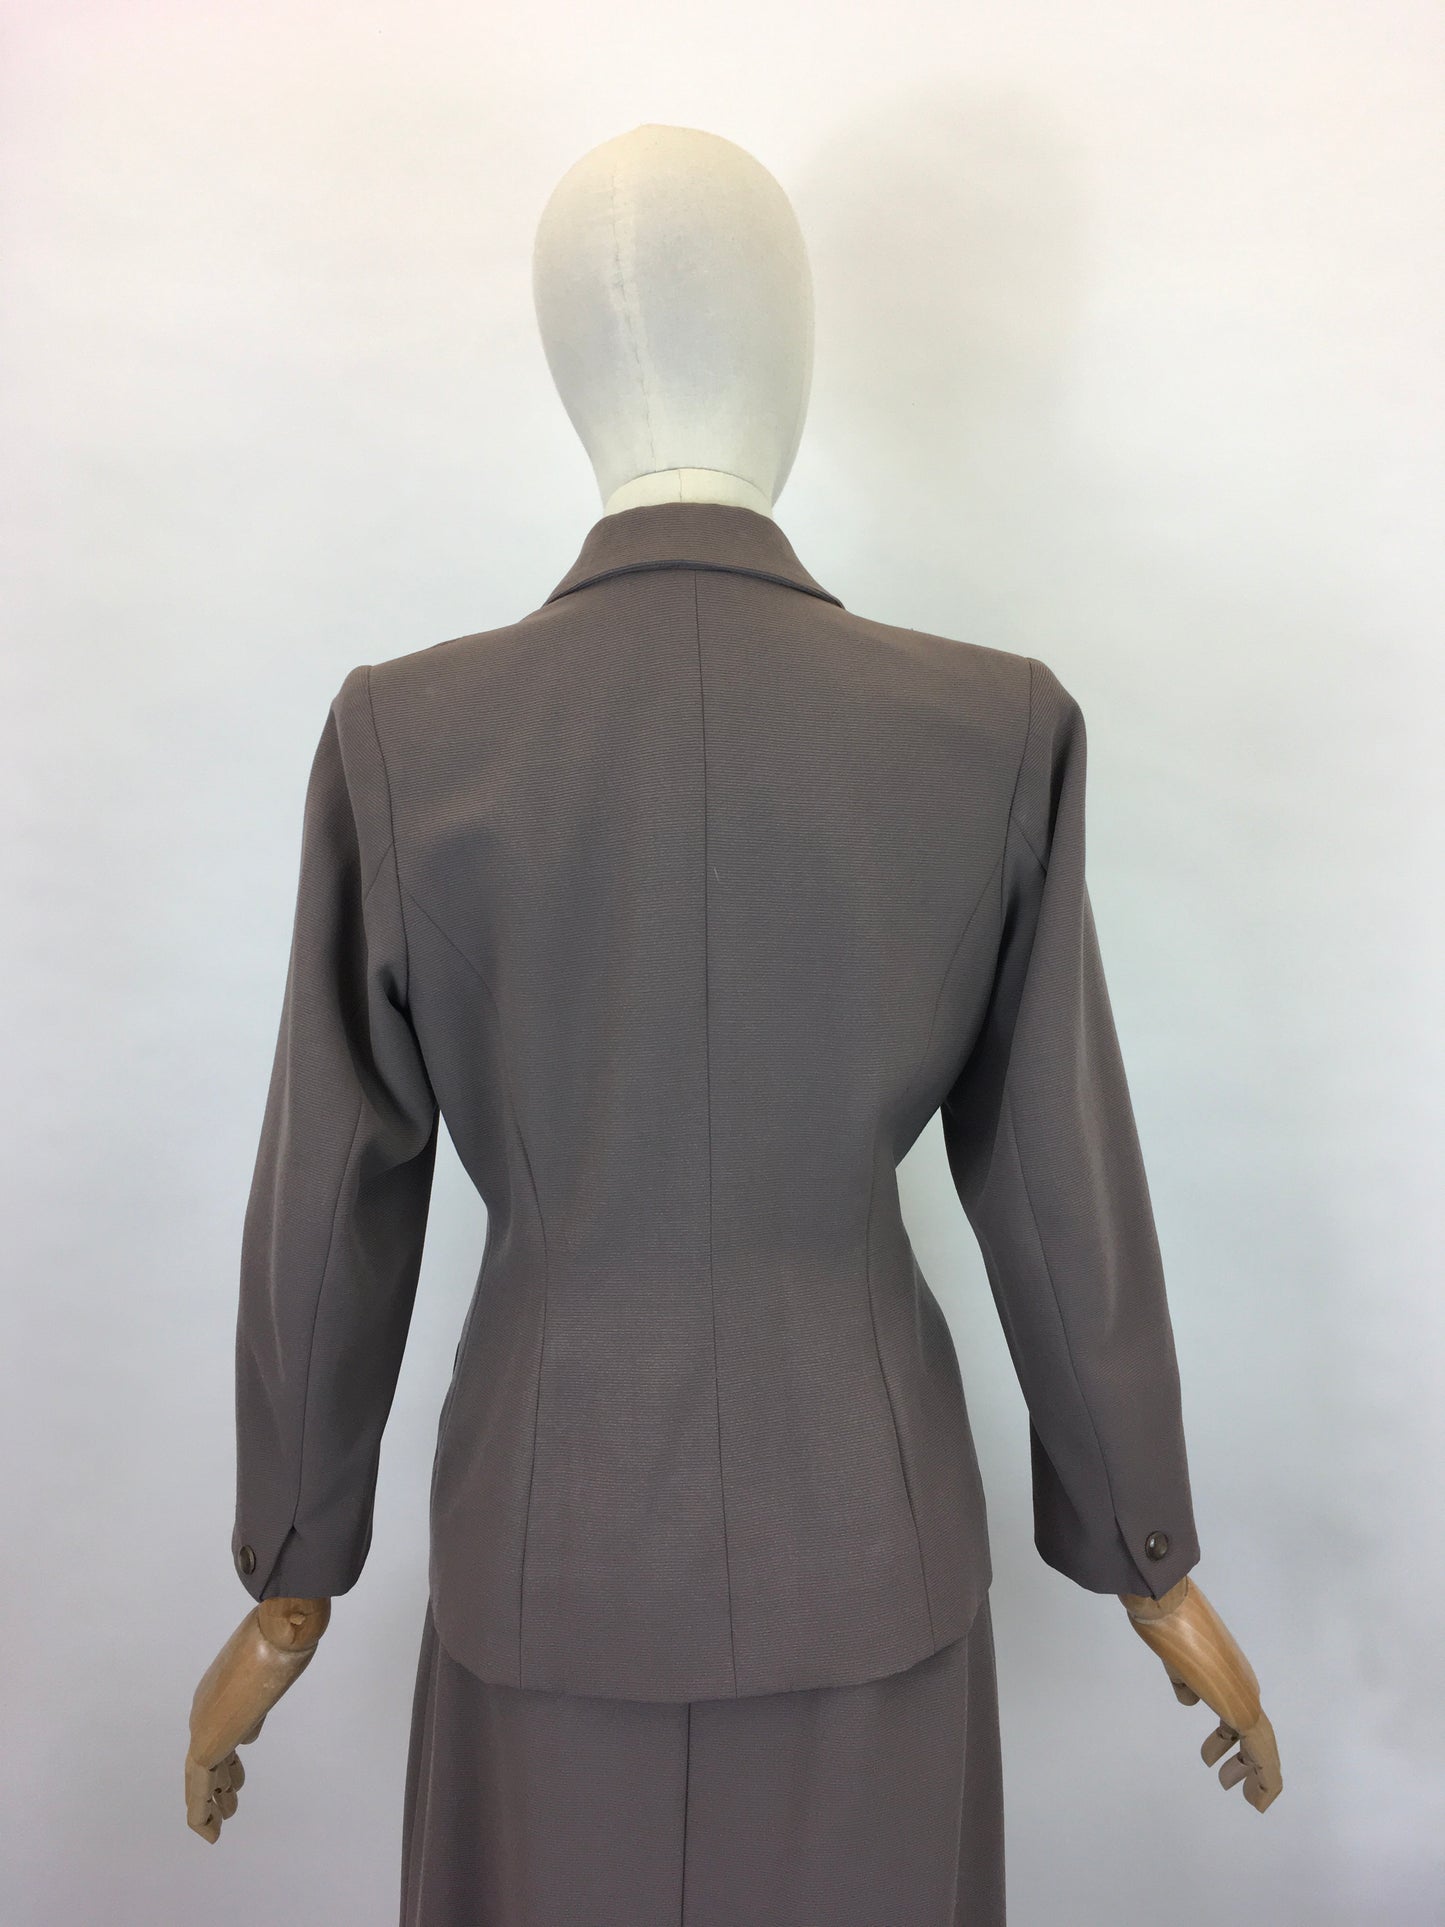 Original 1950’s Beautiful 2 pc Suit - In A Muted Mink Colour